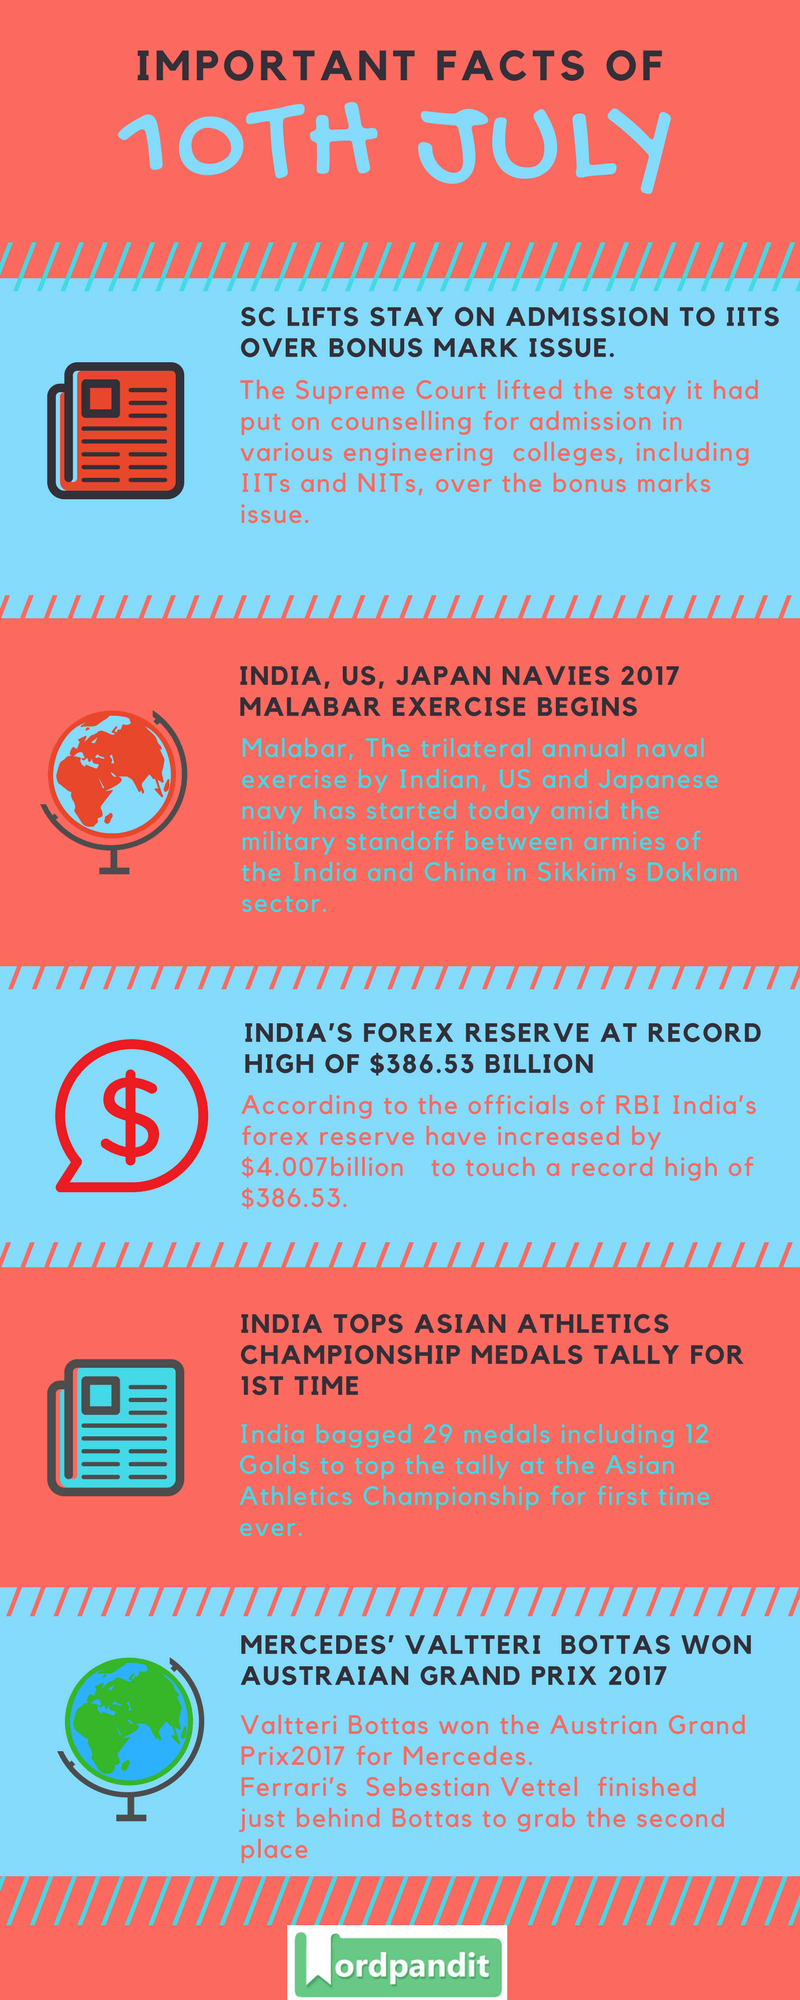 Daily-Current-Affairs-10-july-2017-Current-Affairs-Quiz-july-10-2017-Current-Affairs-Infographic